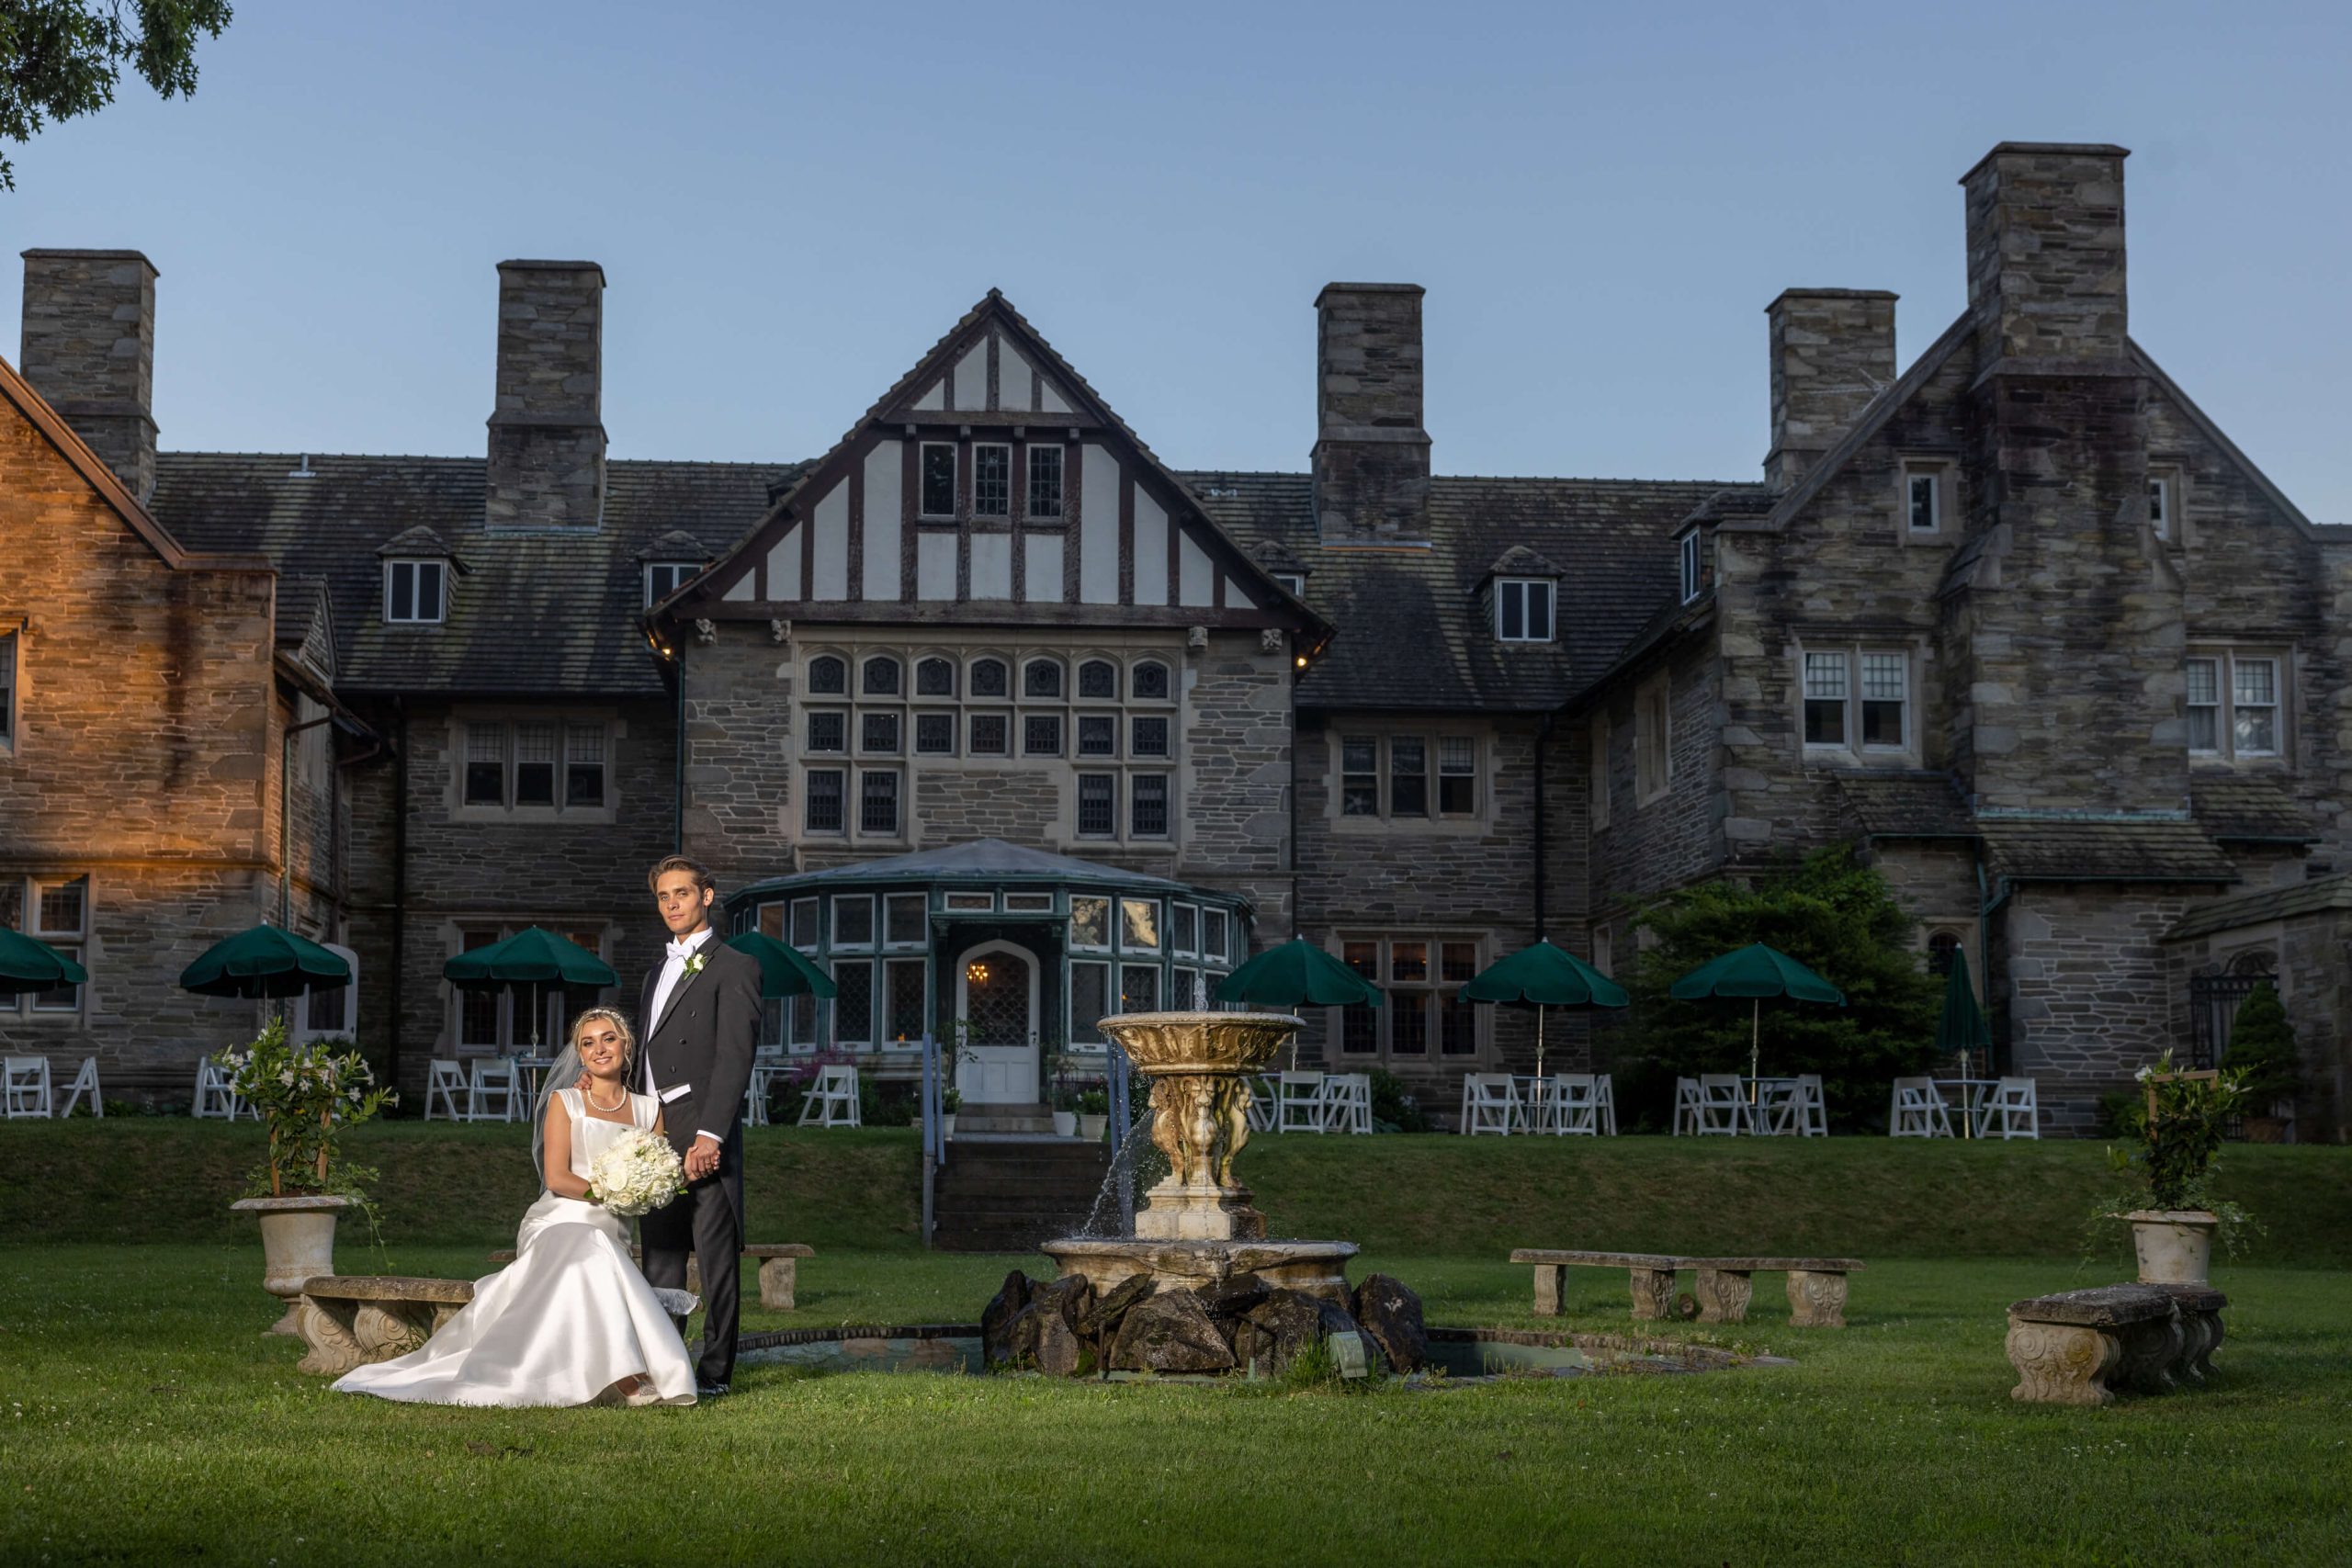 Capture the Grandeur of Greystone Hall at The North Garden